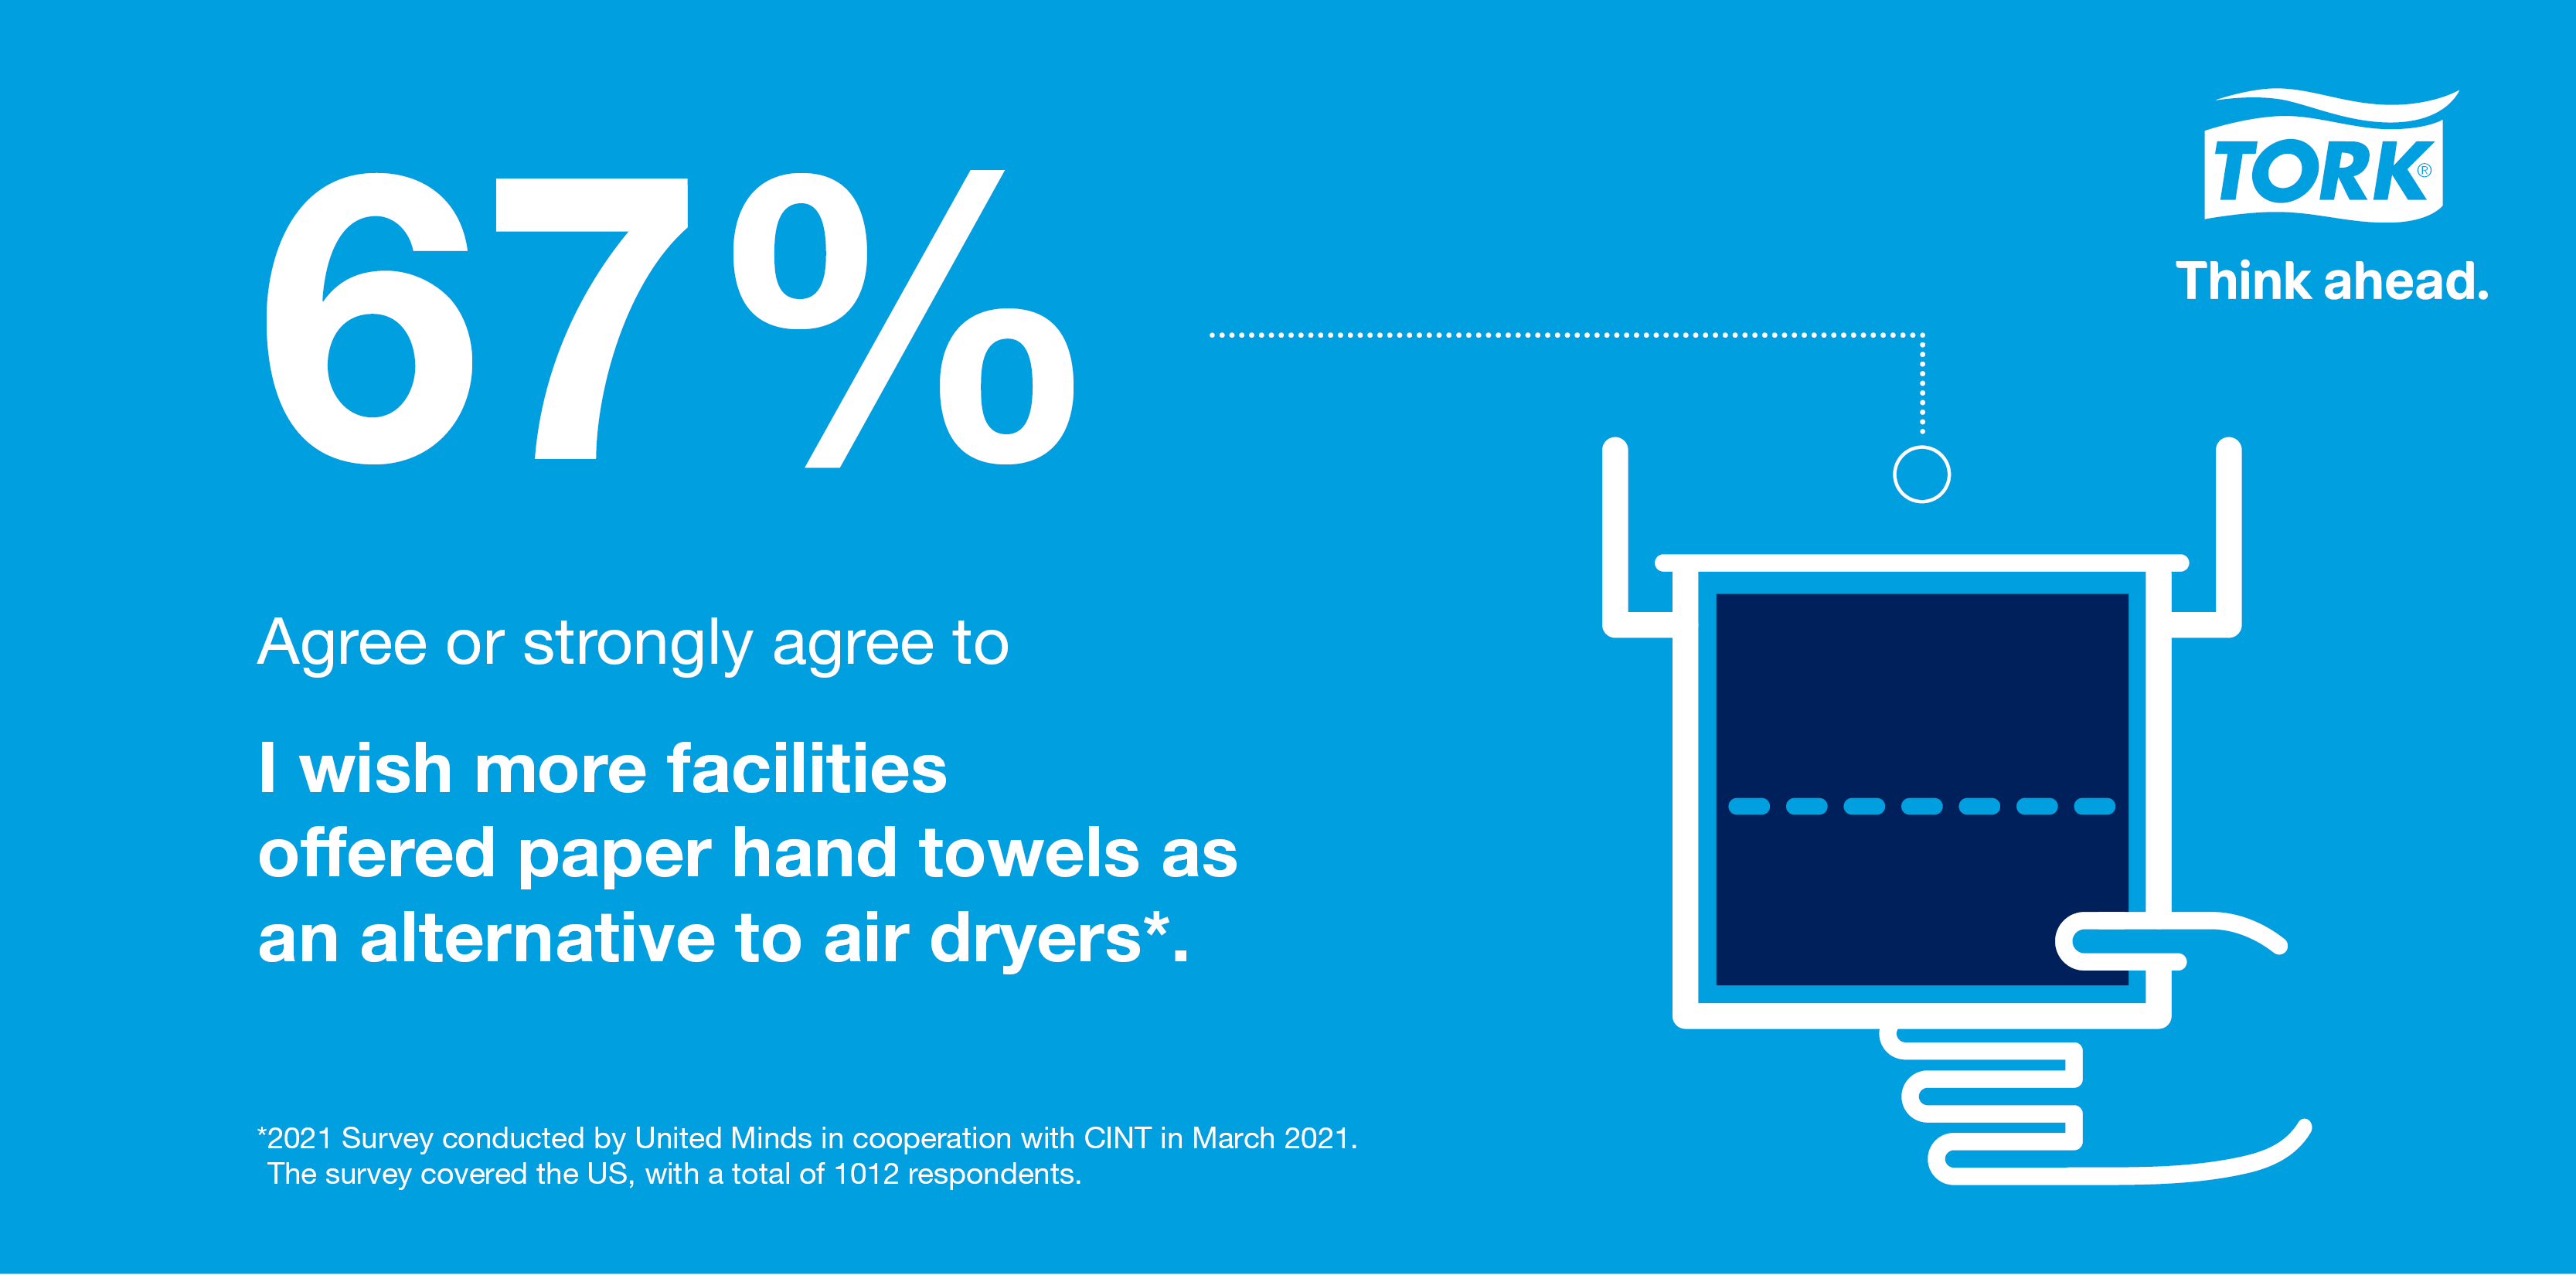 67 percent agree or strongly agree to I wish more facilities offered paper hand towels as an alternative to air dryers